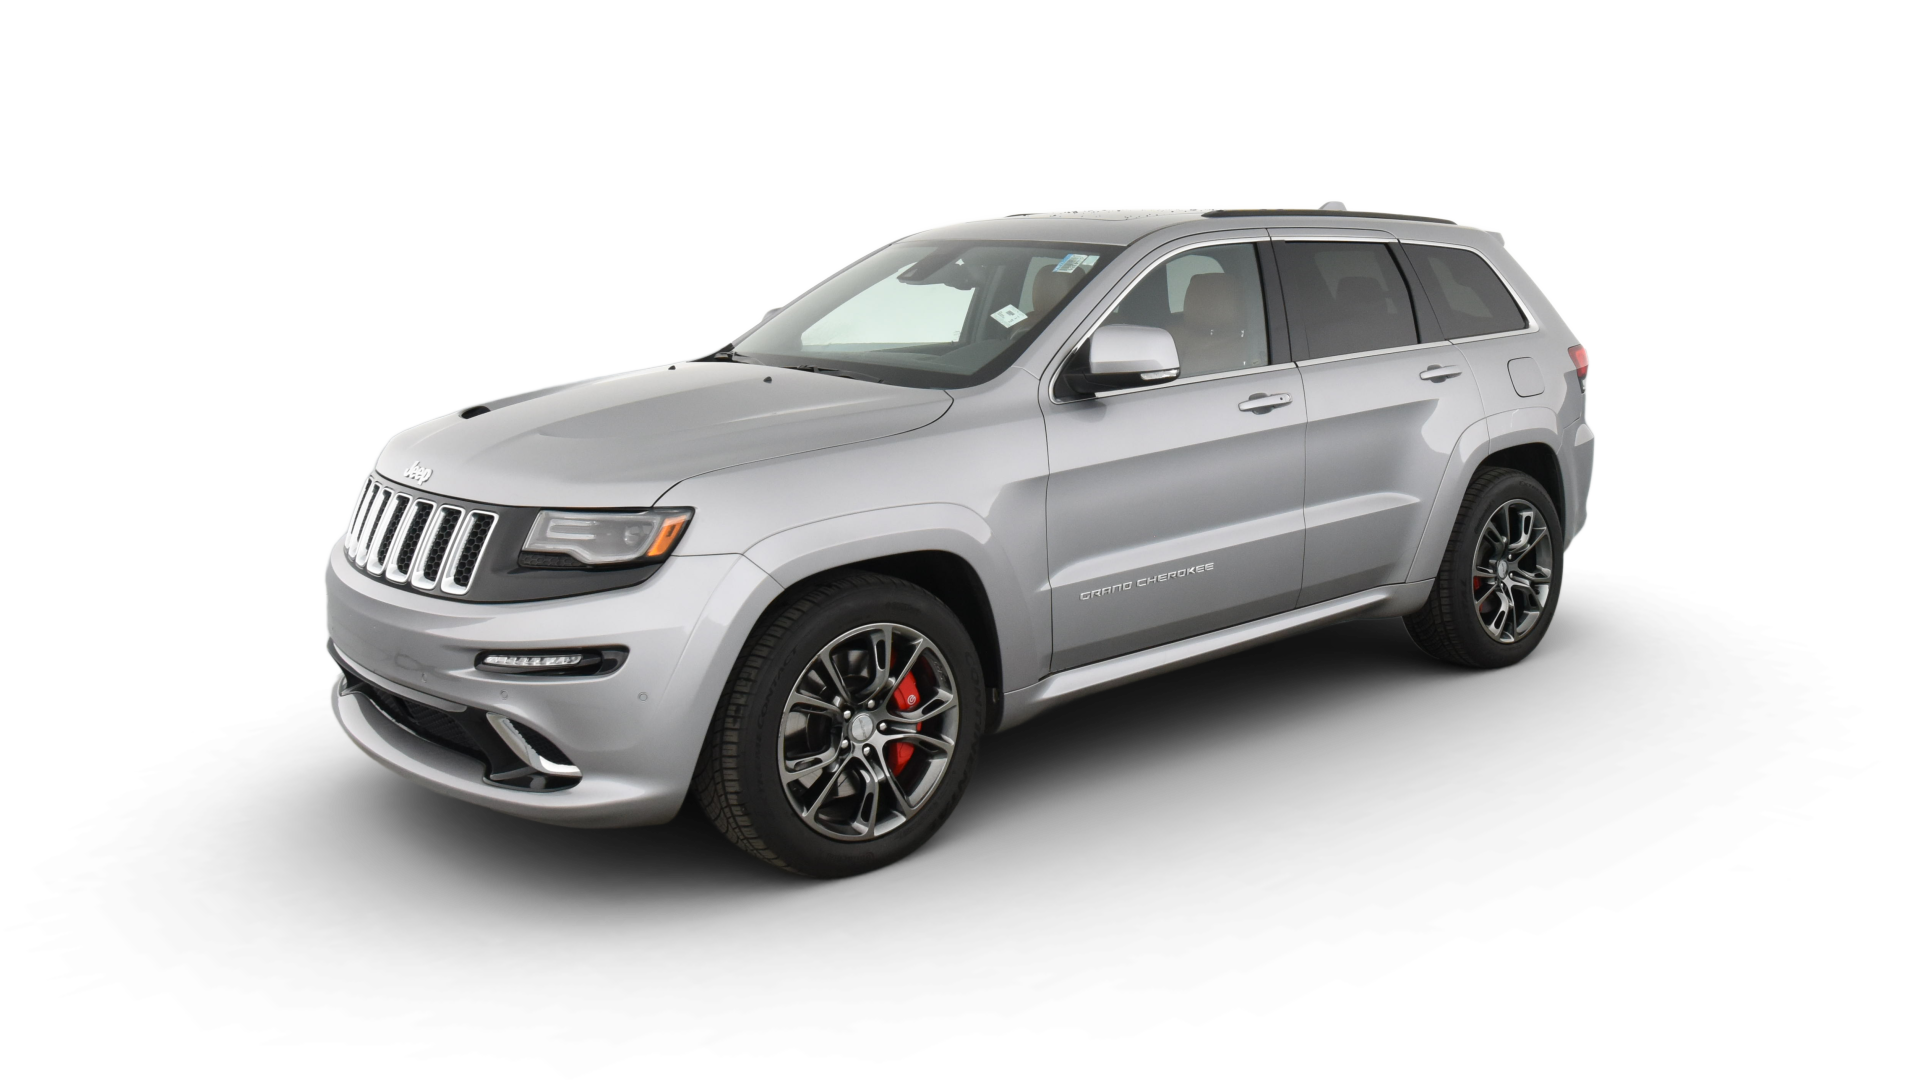 Used Jeep Grand Cherokee SRT for Sale Online